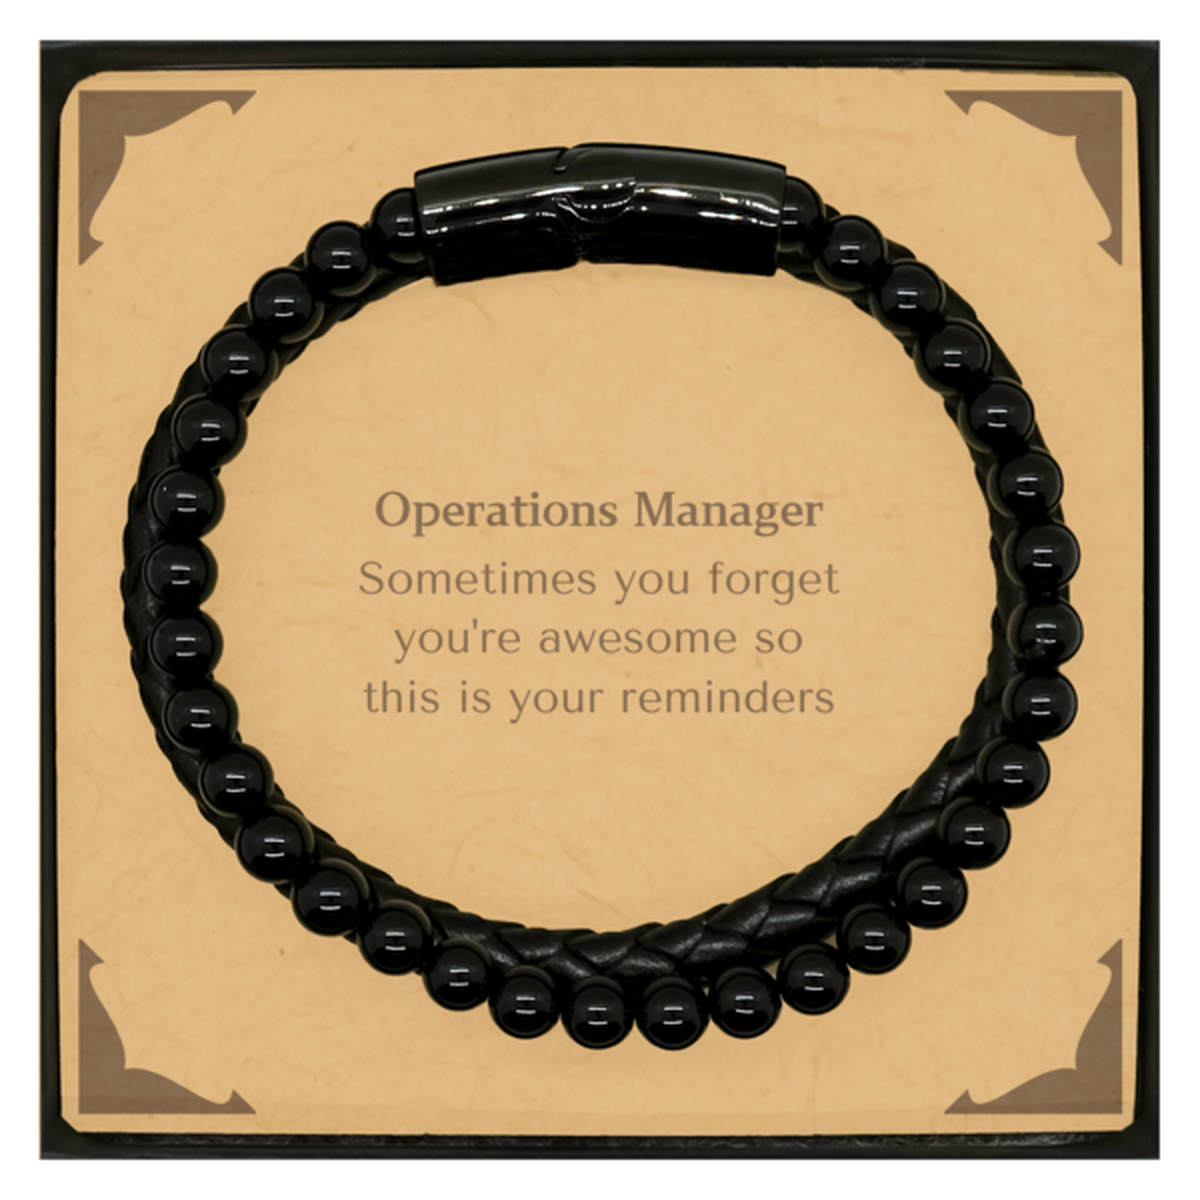 Sentimental Operations Manager Stone Leather Bracelets, Operations Manager Sometimes you forget you're awesome so this is your reminders, Graduation Christmas Birthday Gifts for Operations Manager, Men, Women, Coworkers